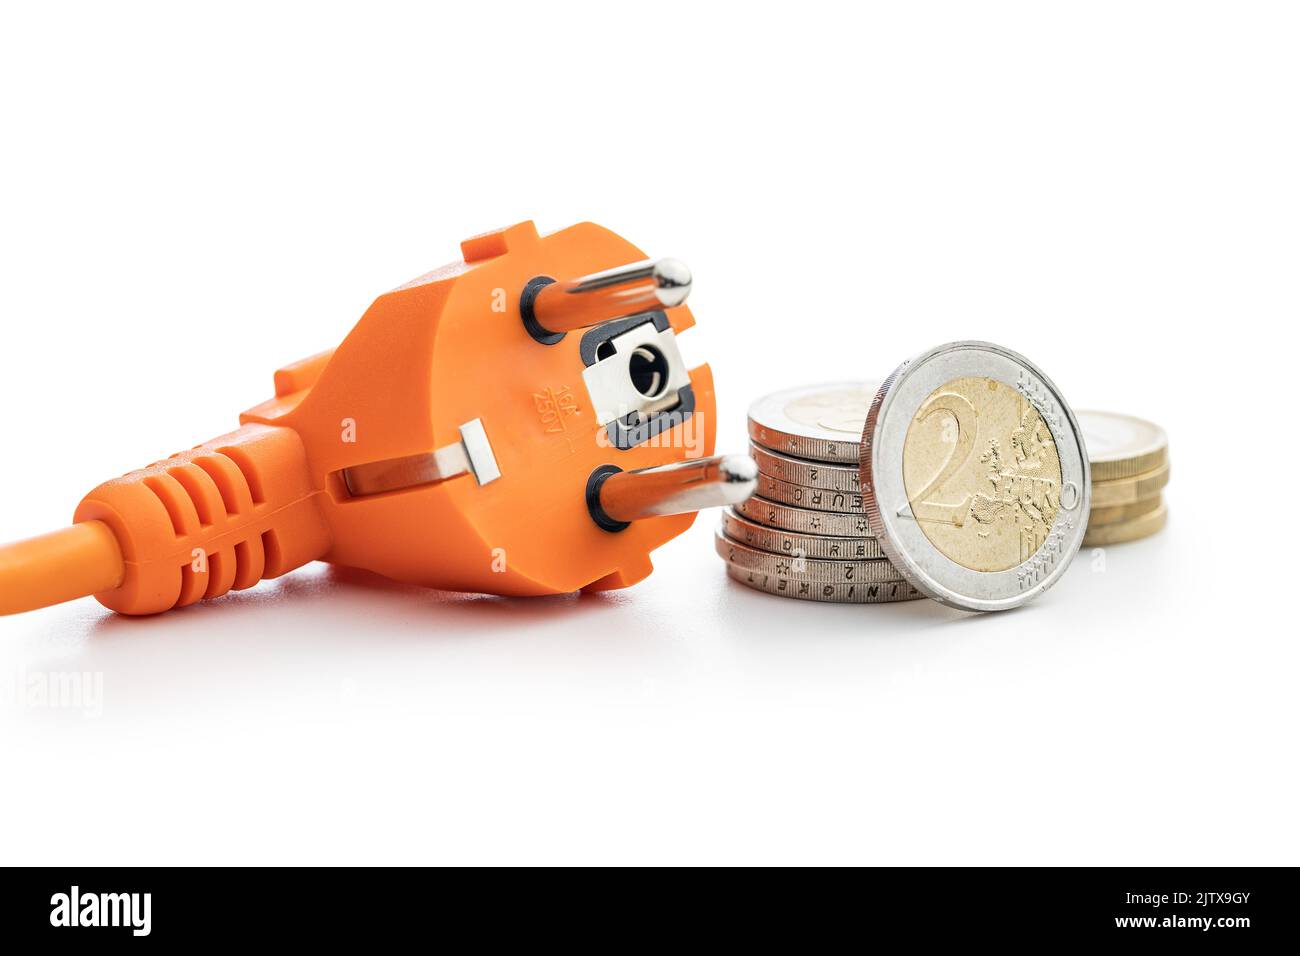 Electric plug and euro coins isolated on the white background. Concept of increasing electricity prices. Stock Photo